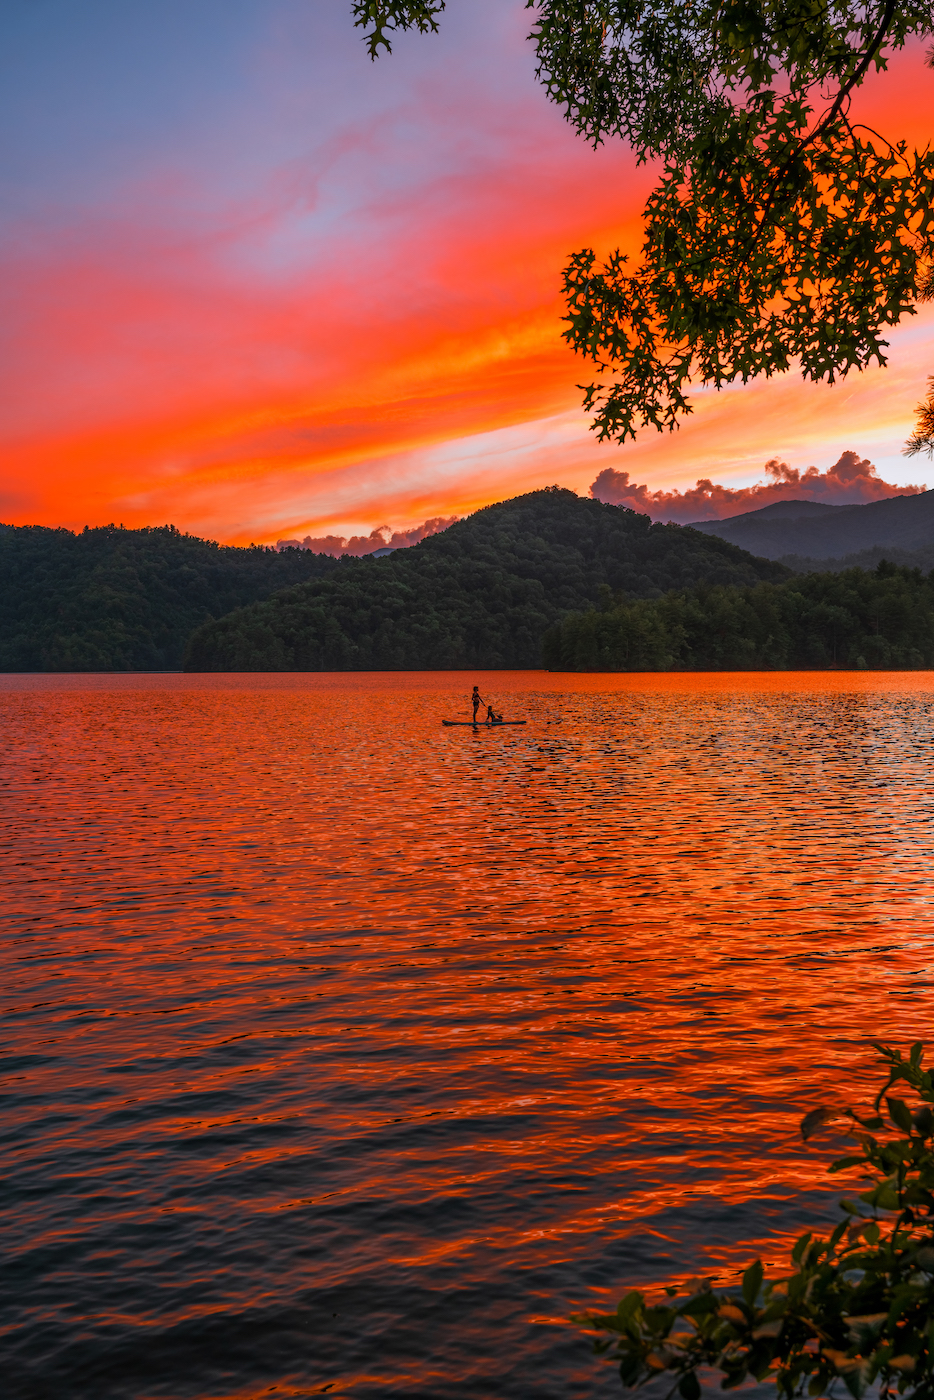 Paddleboarder at sunset taken by Sarah Leek - One of the best photographers in North Carolina